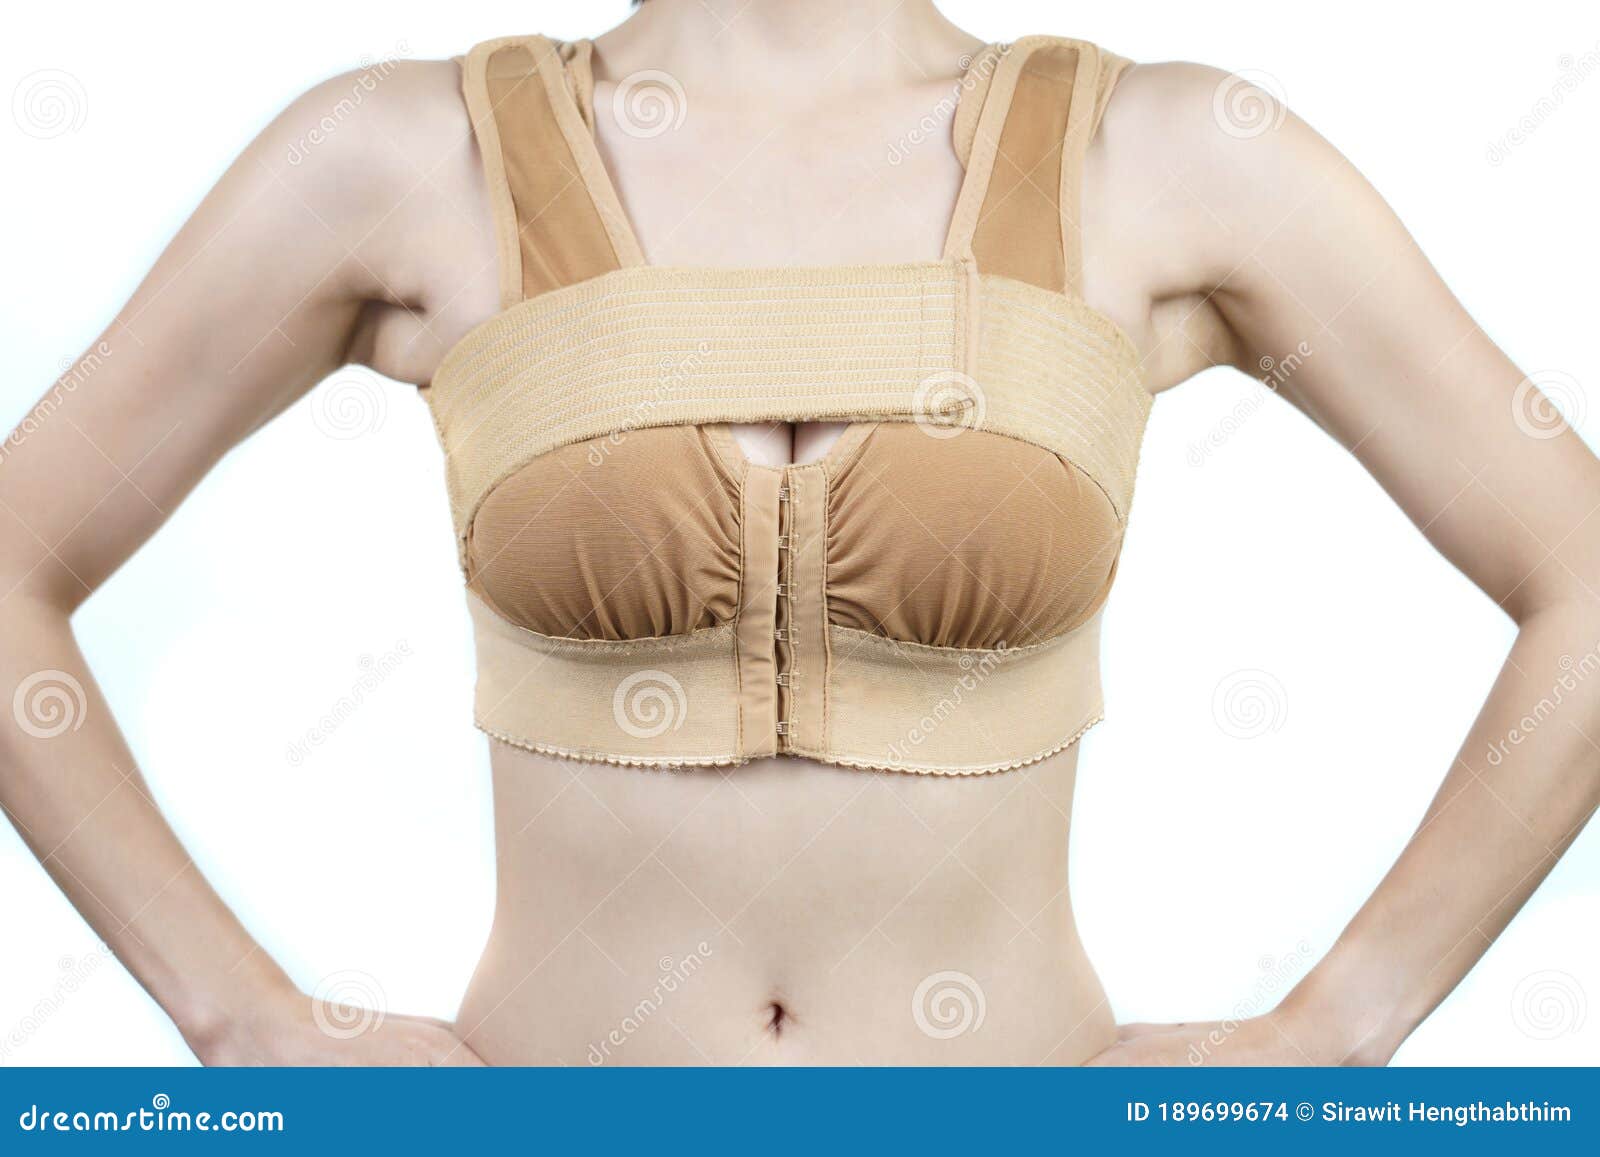 Woman Posing in Support Bra after Breast Augmentation Plastic